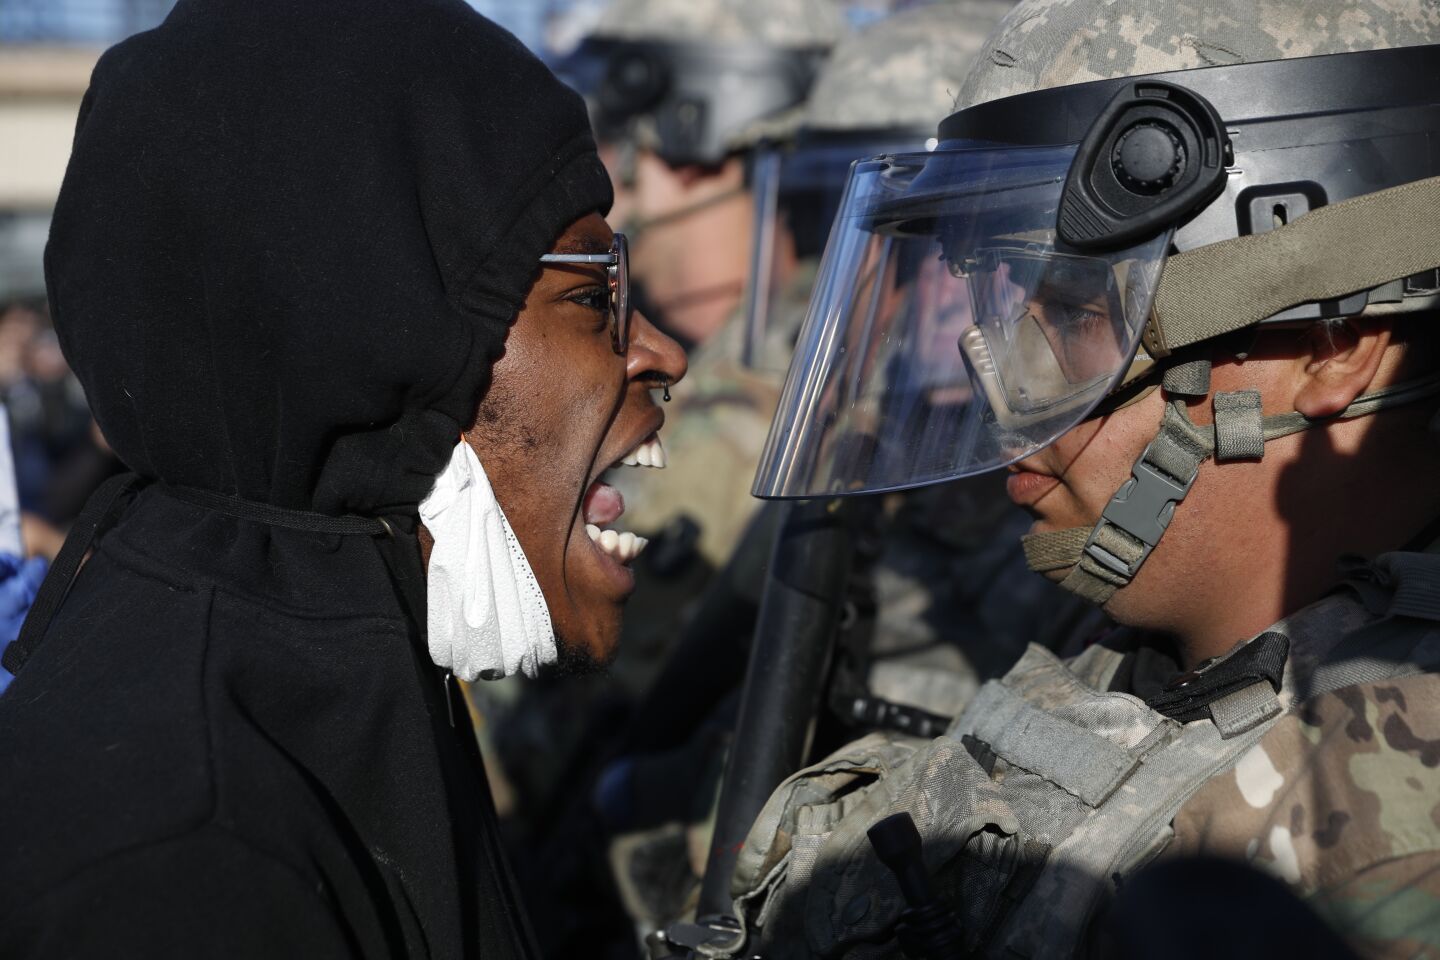 A protester yells at a member of the Minnesota National Guard